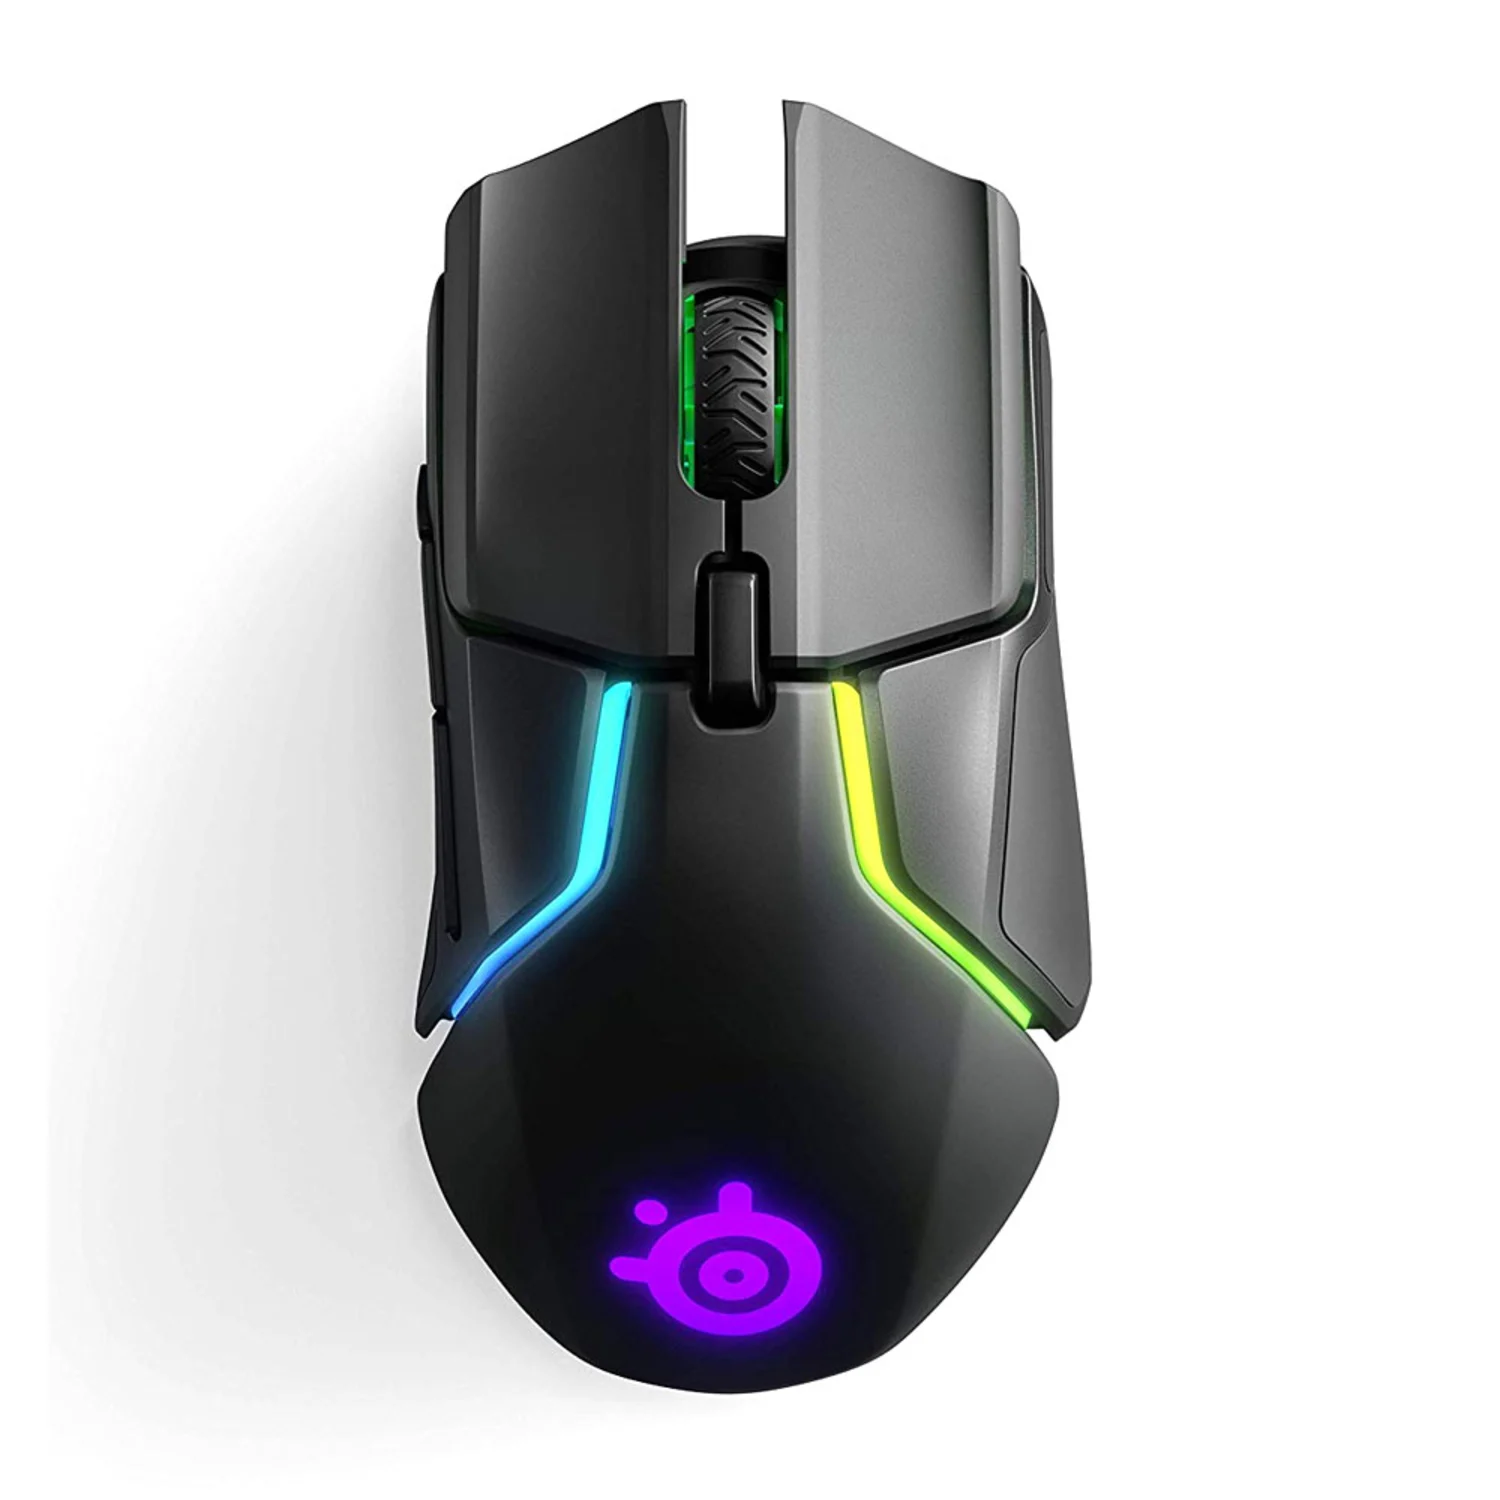 Mouse Gamer Steelseries Rival 650 Wireless - Preto (62456)